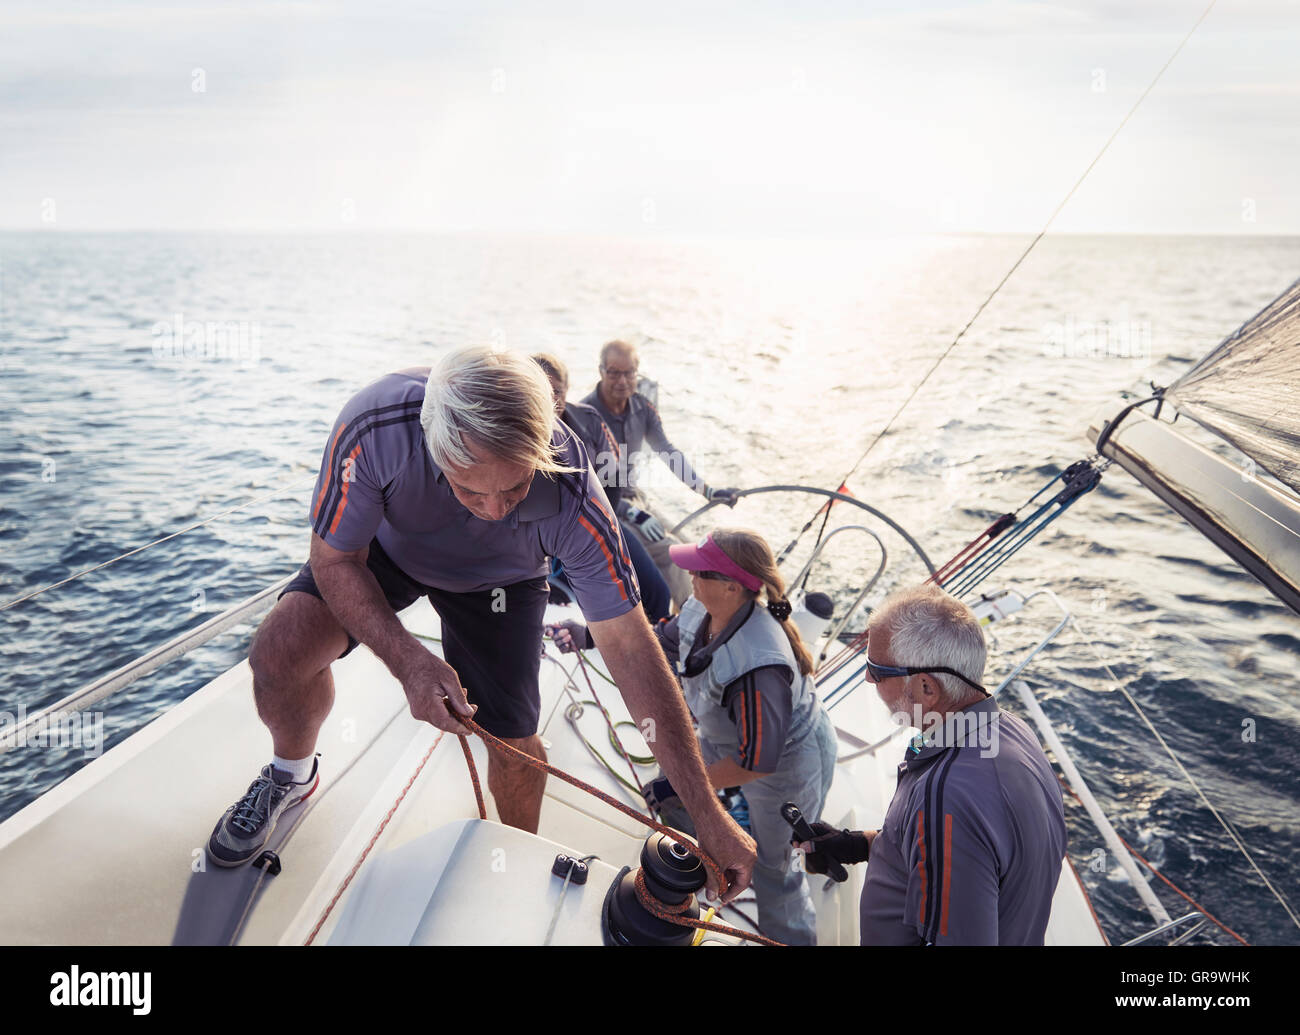 Retired friends sailing on sunny ocean Stock Photo